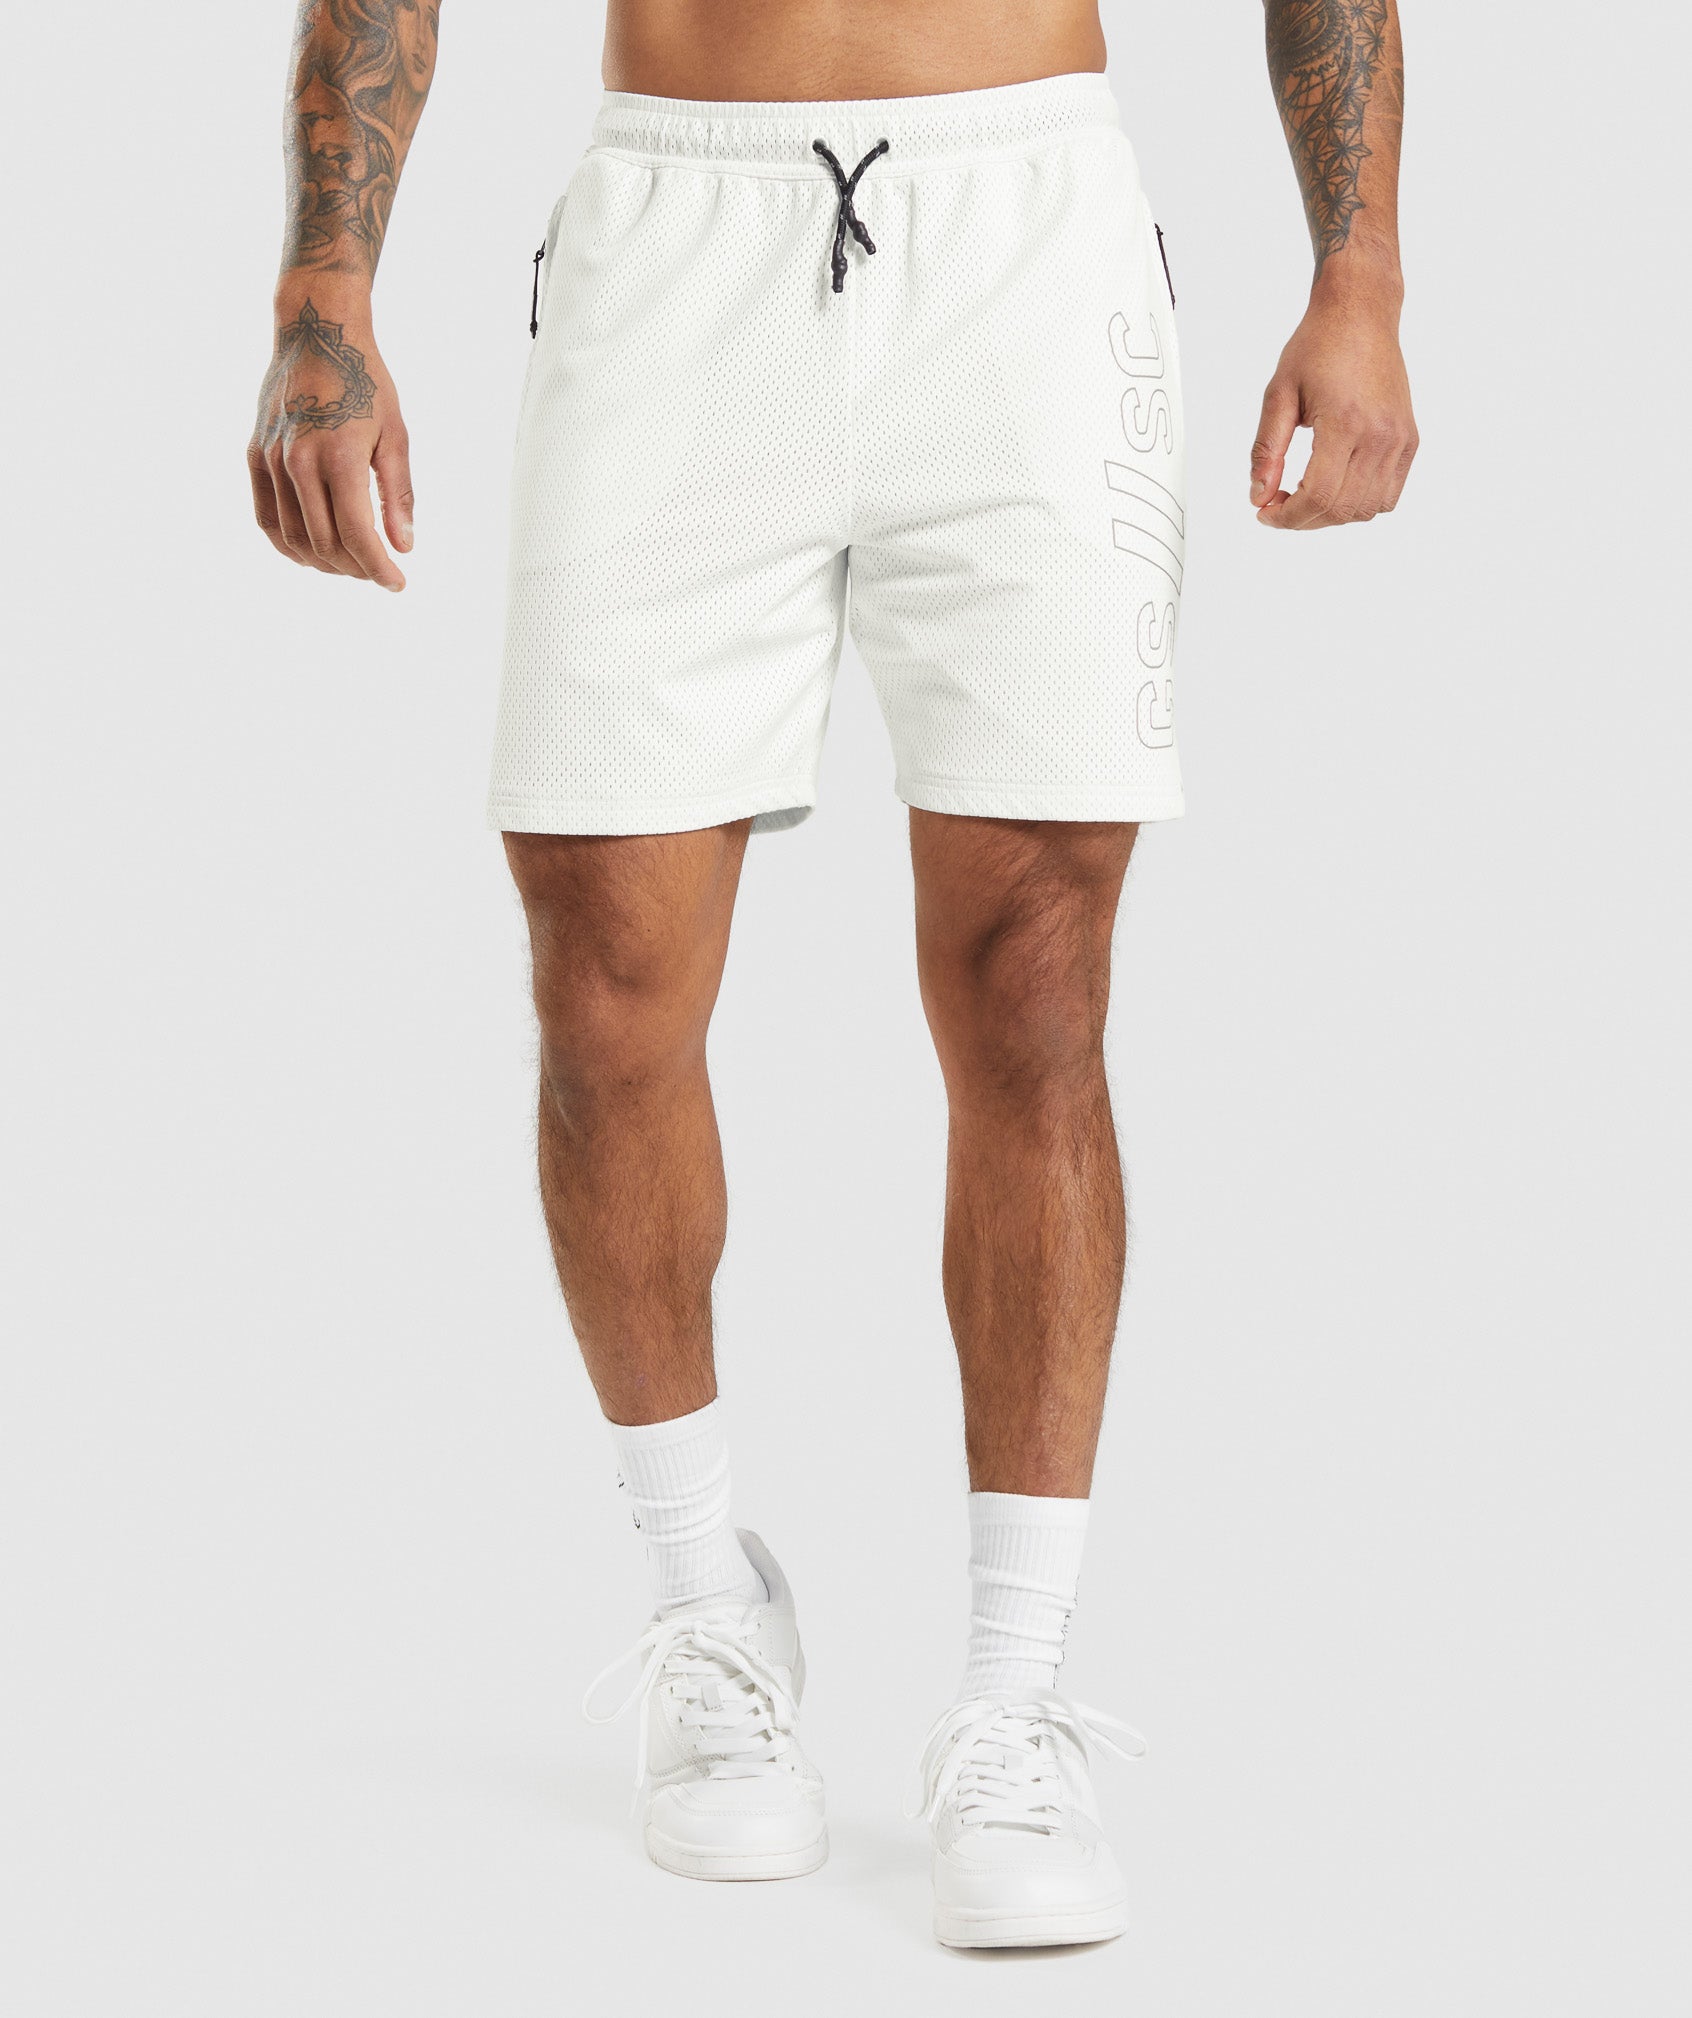 Gymshark//Steve Cook Mesh Shorts in Off White - view 1